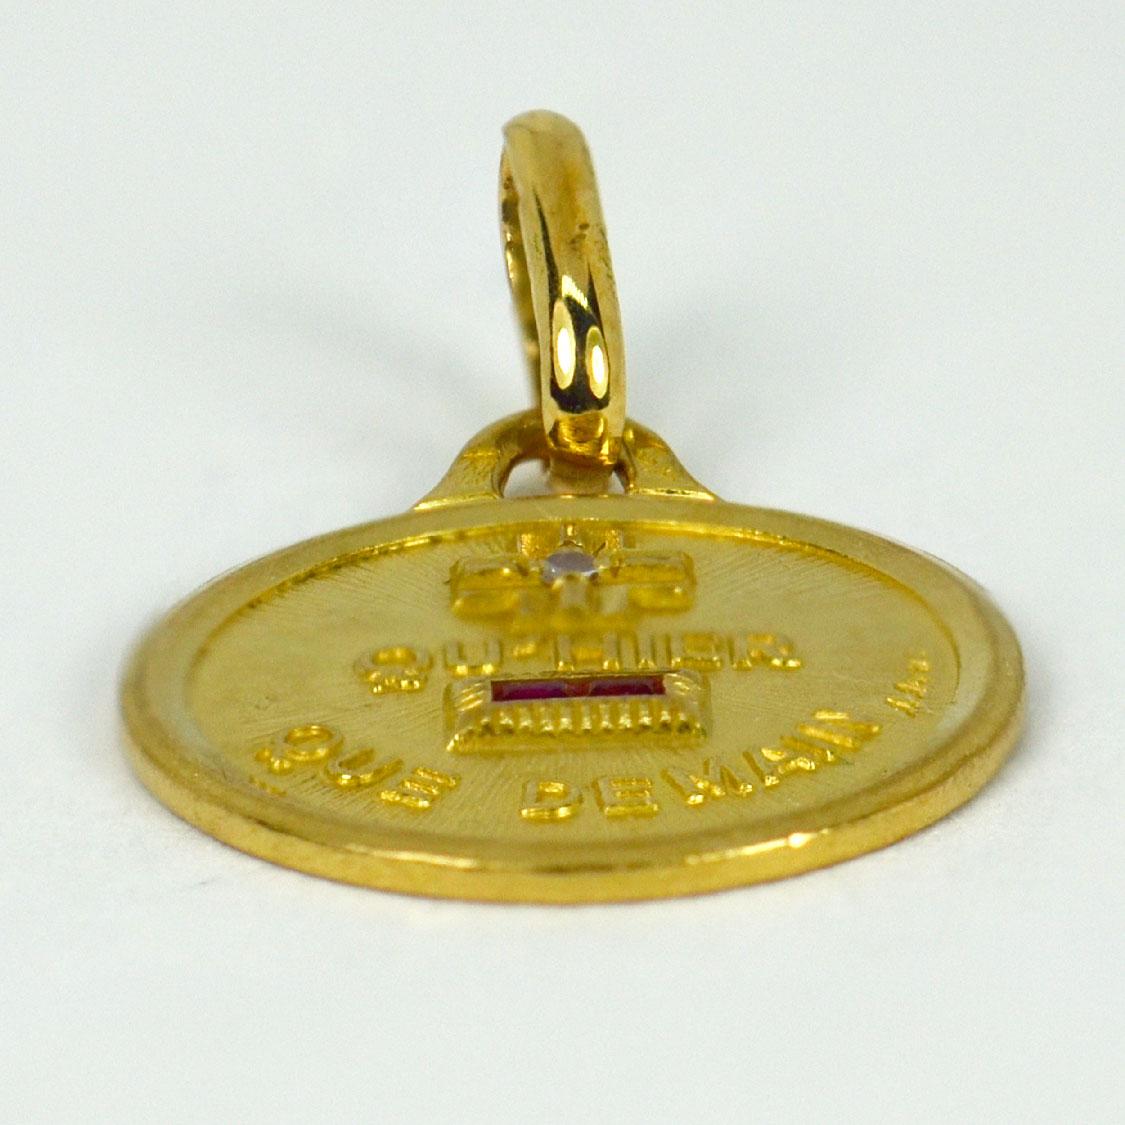 A French 18 karat (18K) yellow gold, diamond and ruby love charm pendant with a rebus spelling out 